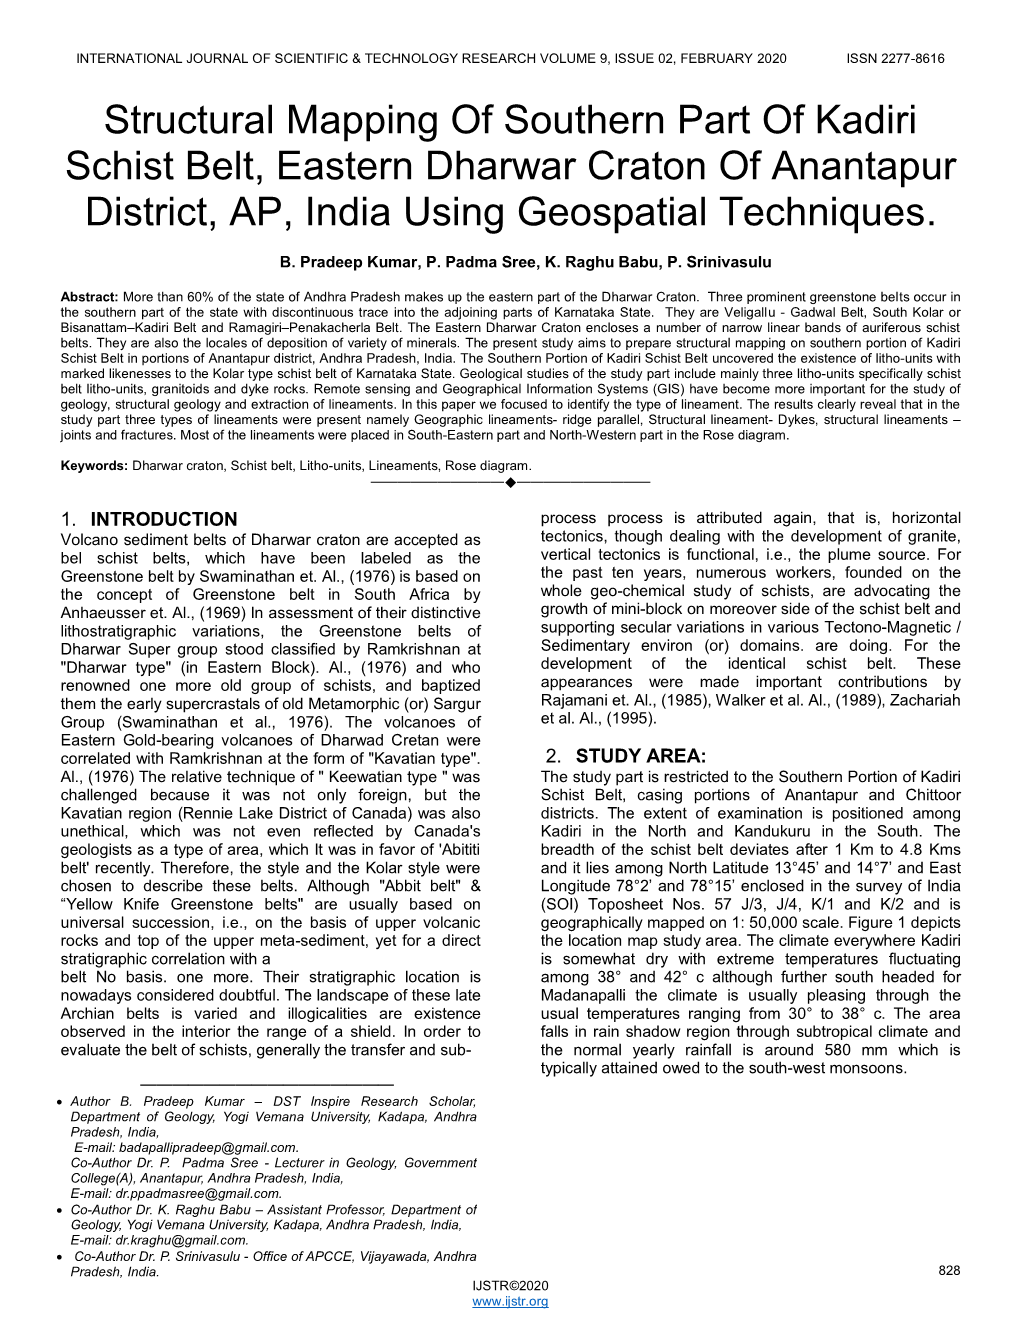 Structural Mapping of Southern Part of Kadiri Schist Belt, Eastern Dharwar Craton of Anantapur District, AP, India Using Geospatial Techniques